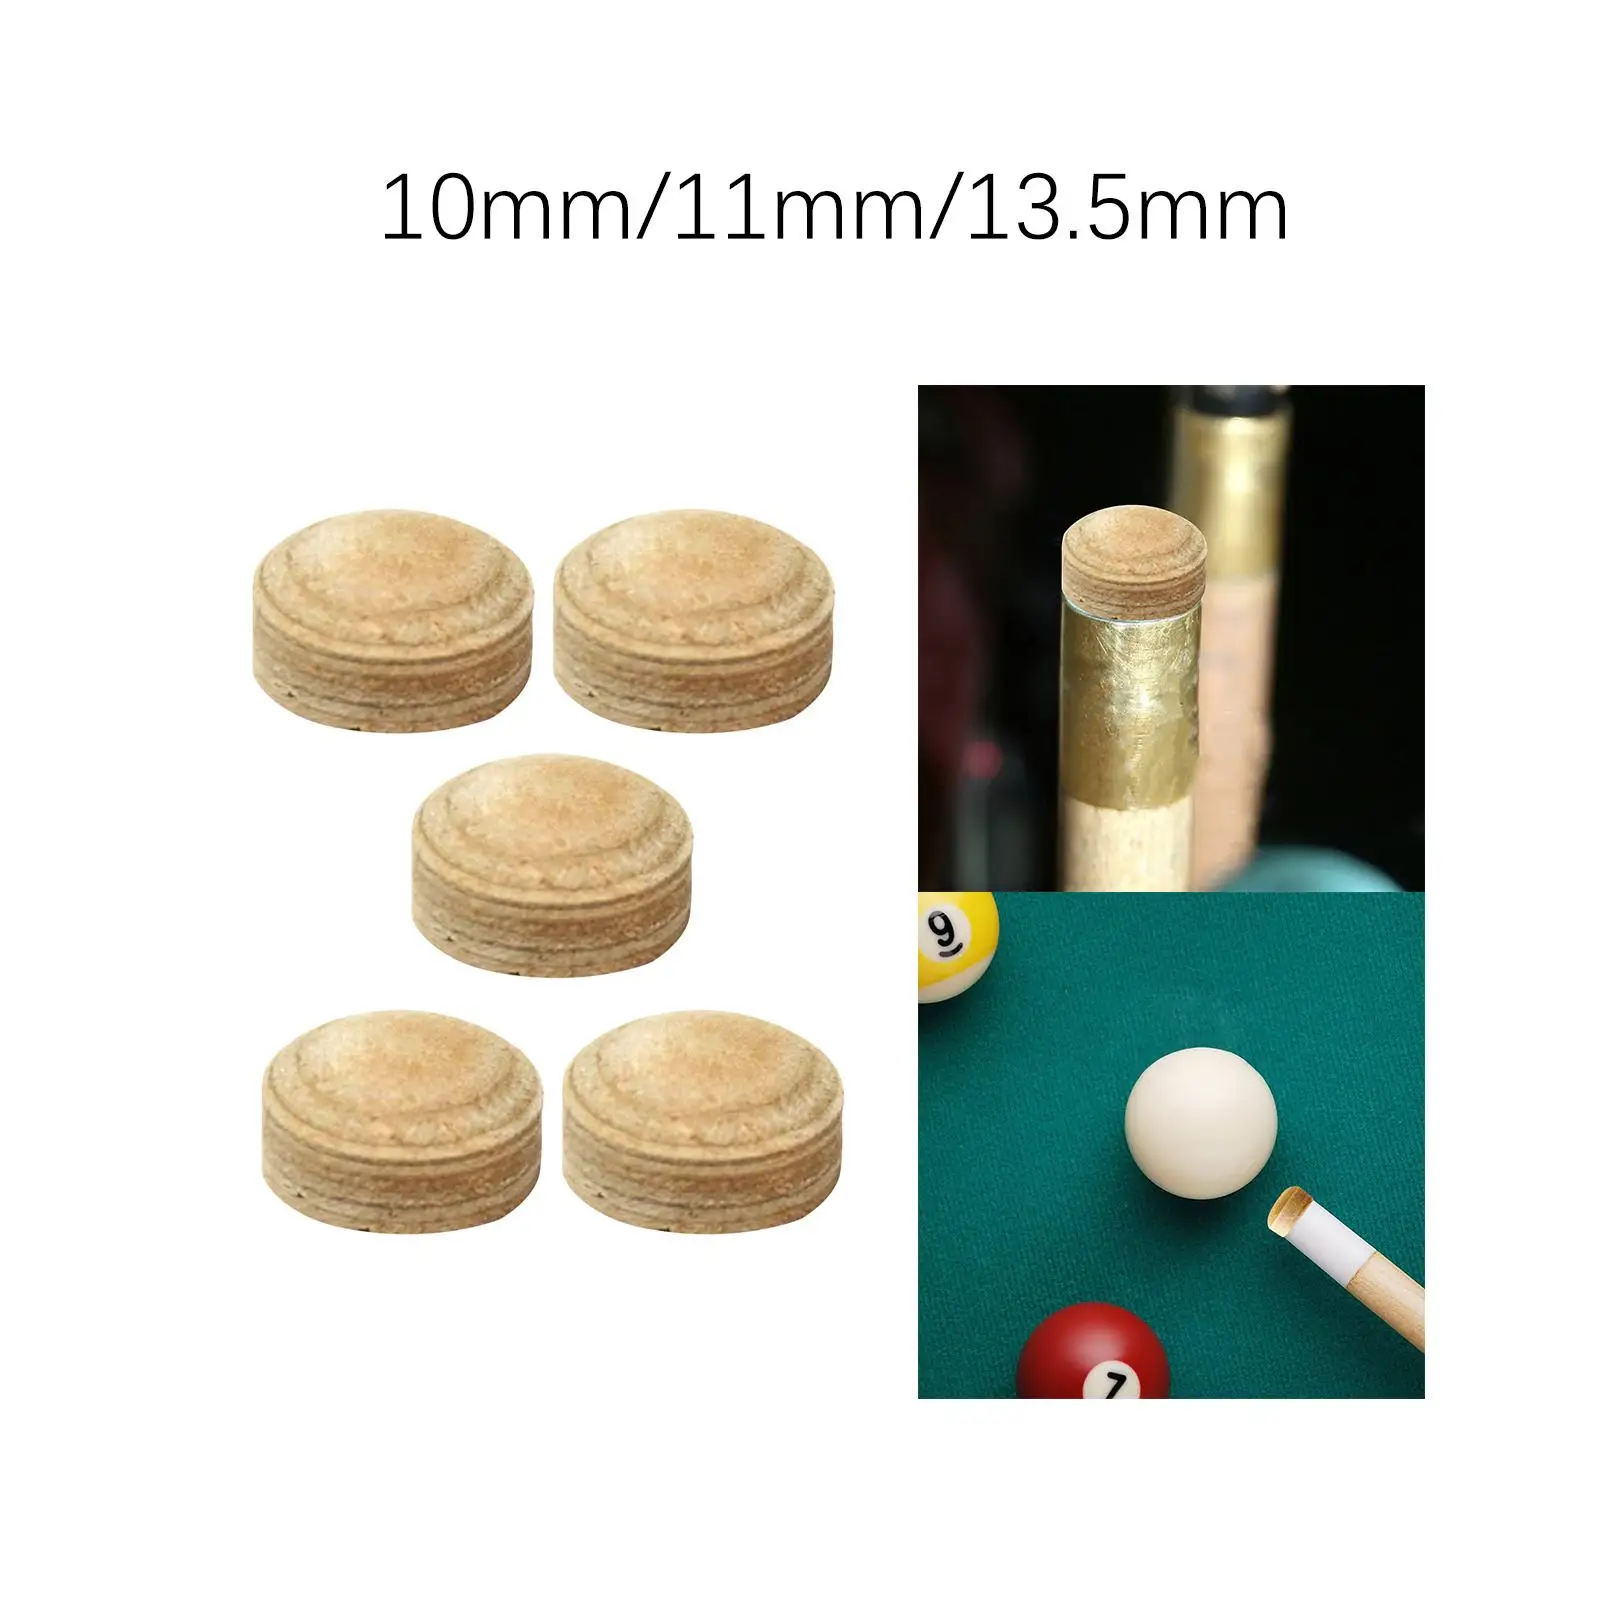 5x Pool Cue Stick Tips Artificial Leather Tips Protector Table Billiards Pool Cue Tips for Pub Home